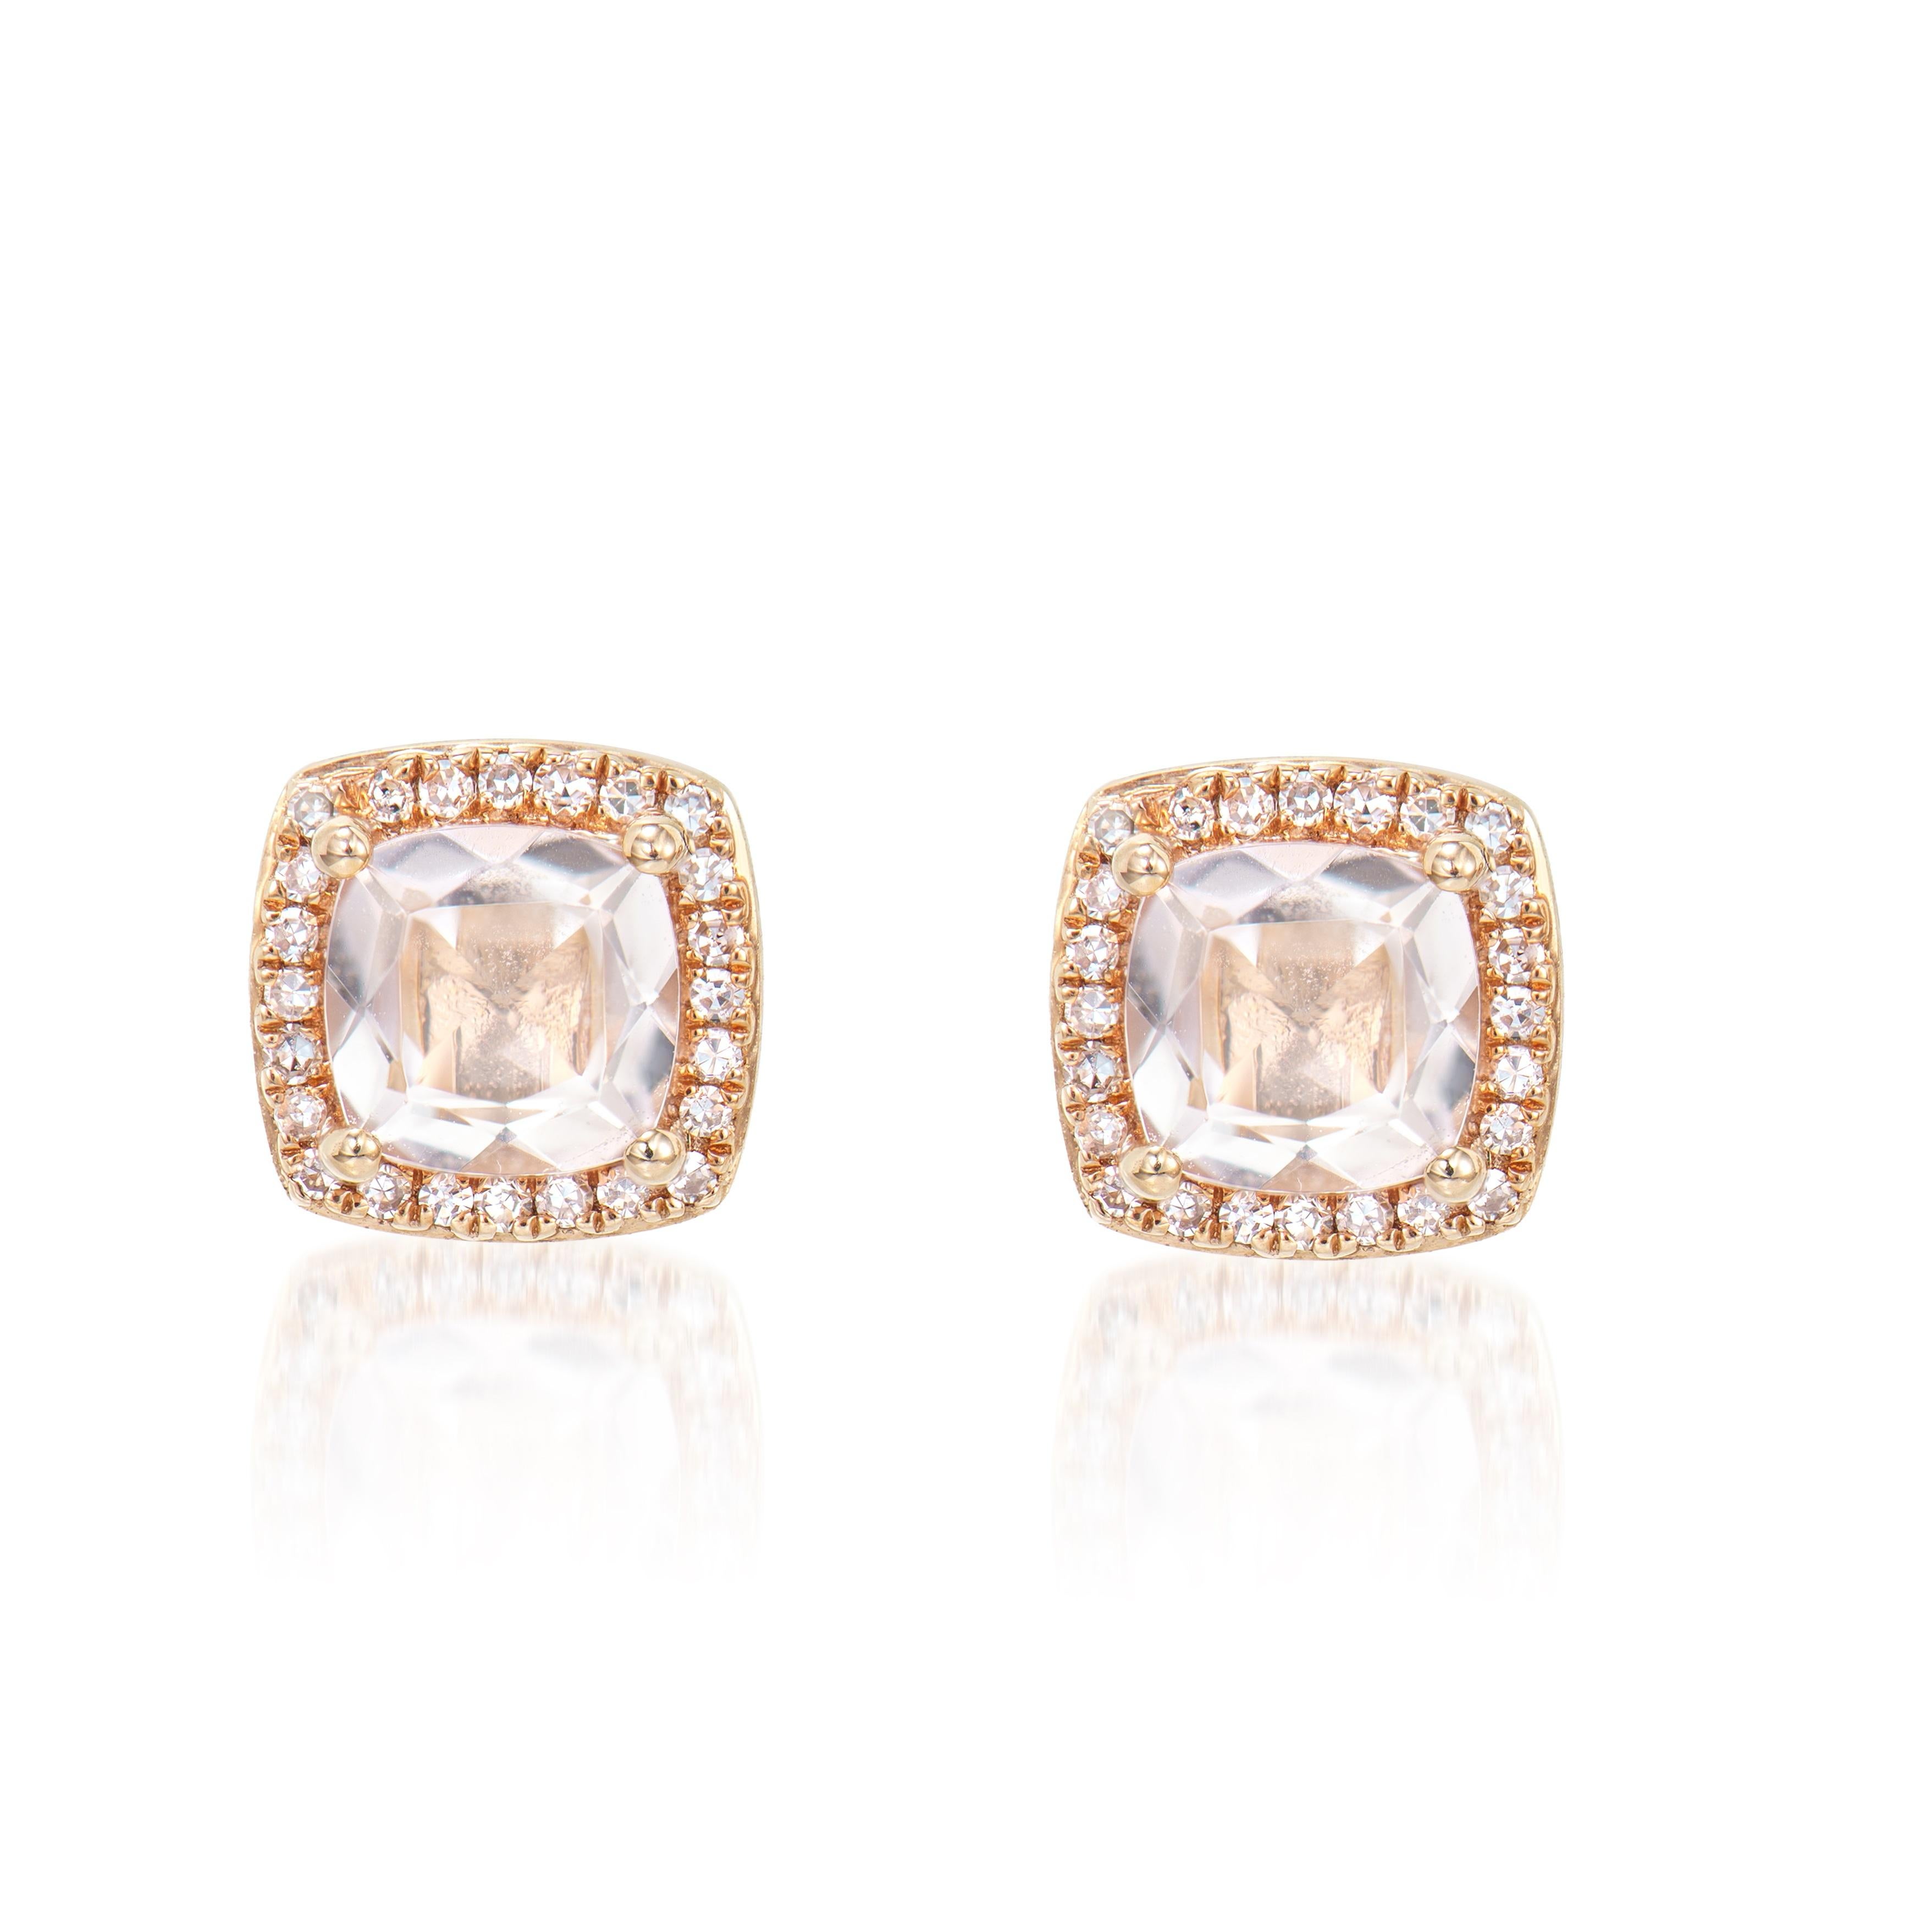 Contemporary 1.00 Carat Morganite Stud Earring in 18Karat Rose Gold with White Diamond. For Sale